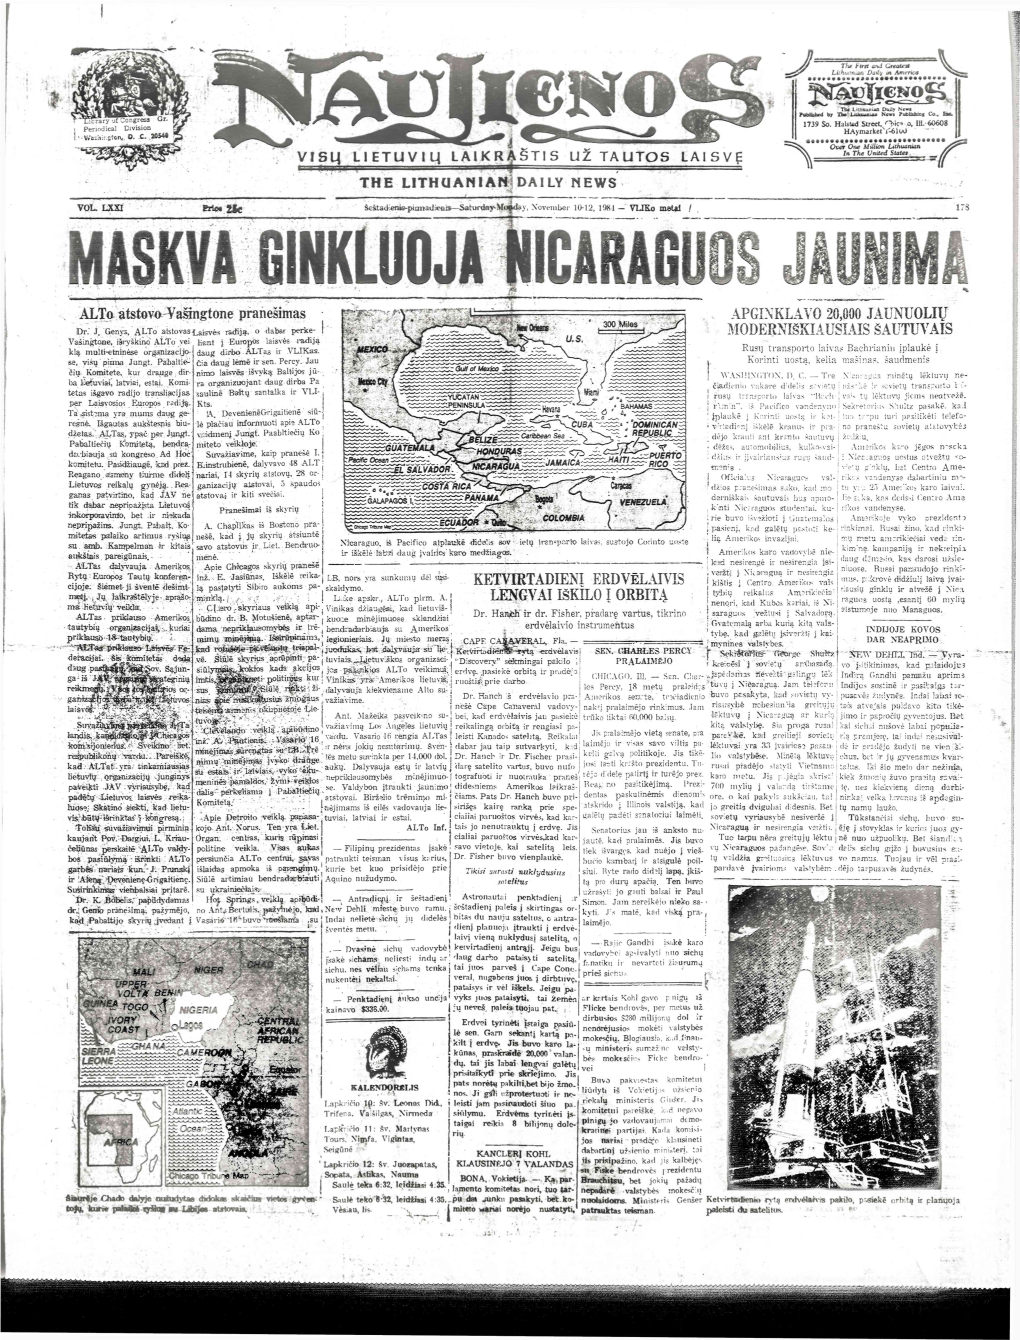 The Lithuanian Daily News